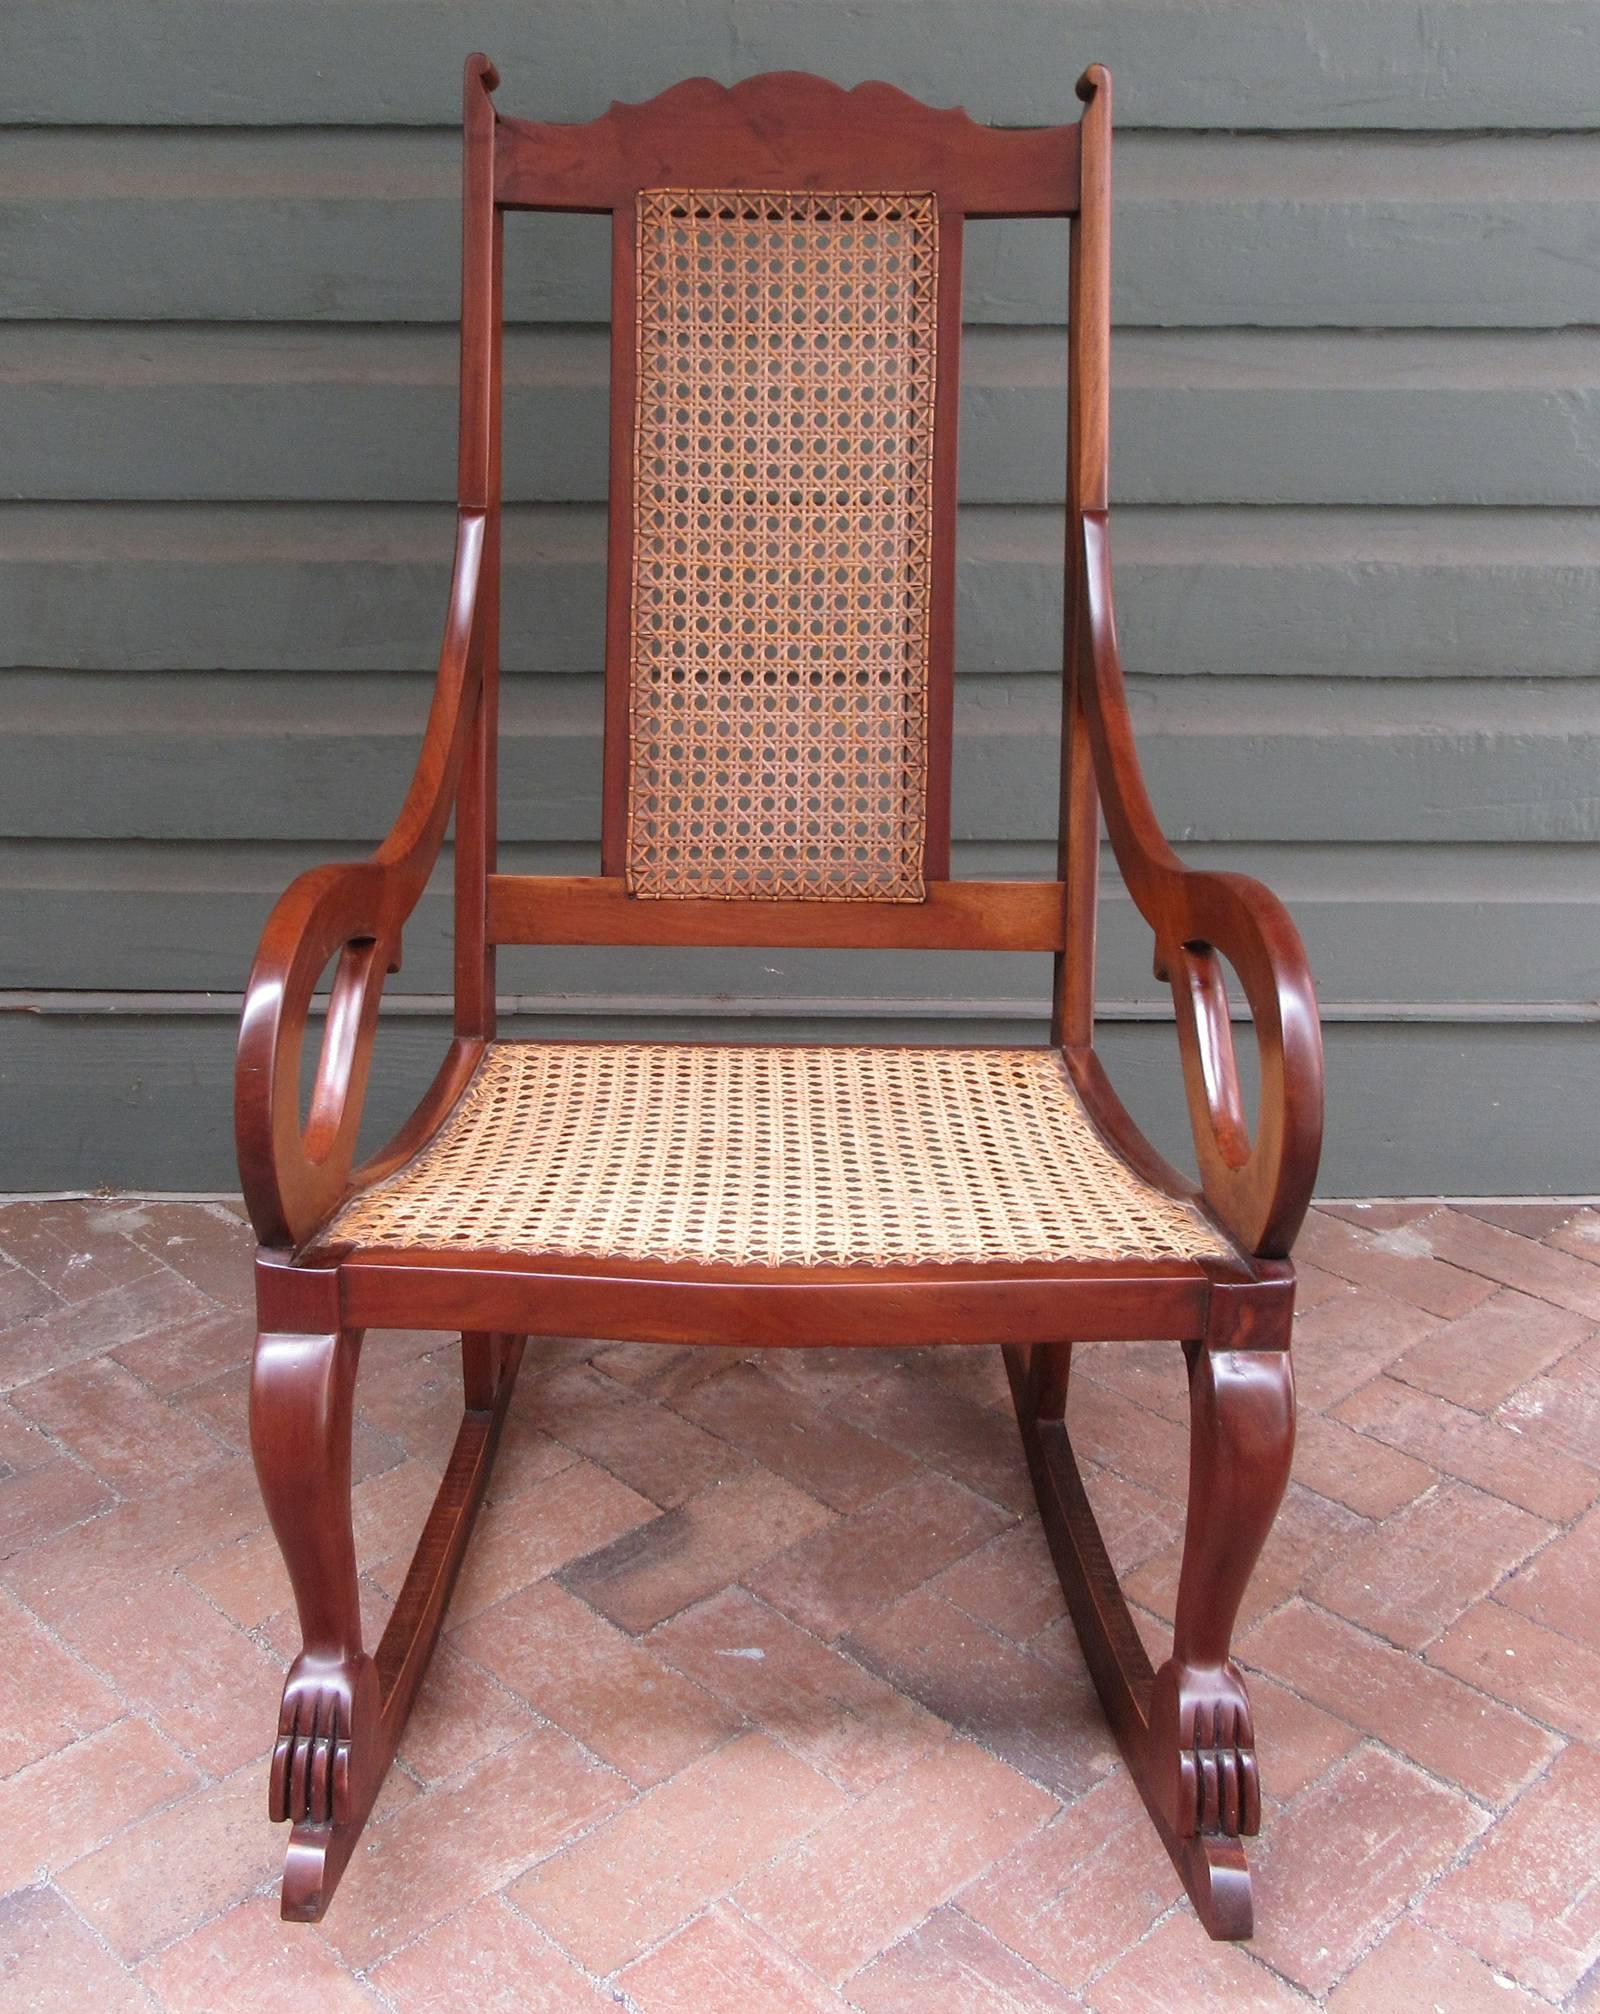 Early 19th Century Caribbean Regency Mahogany and Cane Rocking Chair For Sale 1